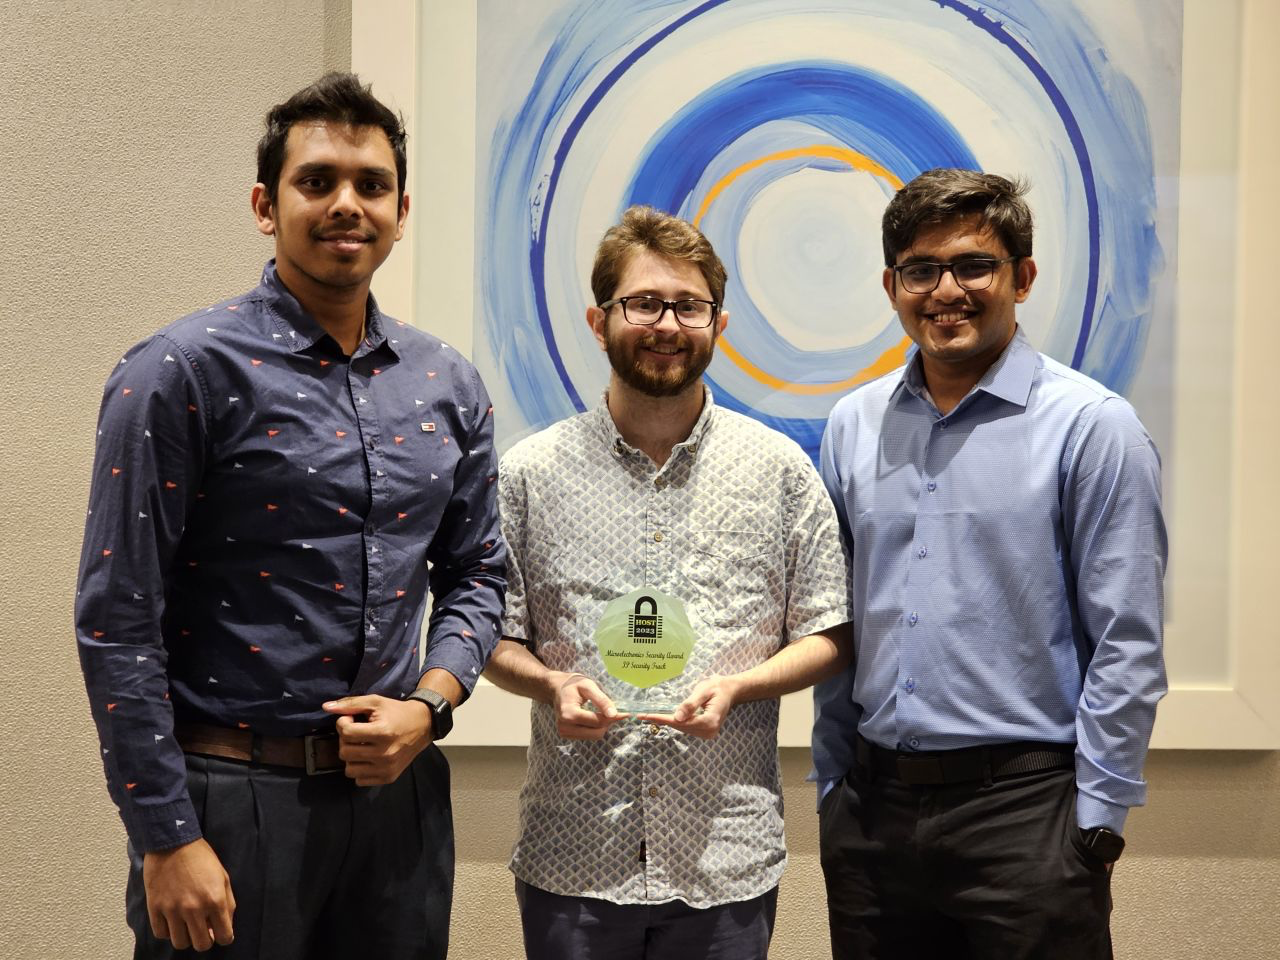 Photo of Mahmudul Hasan (KU), Zachary Ellis (GT), and Tanvir Hossain (KU) holding their award for winning this year's Microelectronics Security Award (IP Security Track) at the IEEE International Symposium on Hardware Oriented Security and Trust (HOST). Not pictured is team Georgia Tech team member Anupam Golder. 